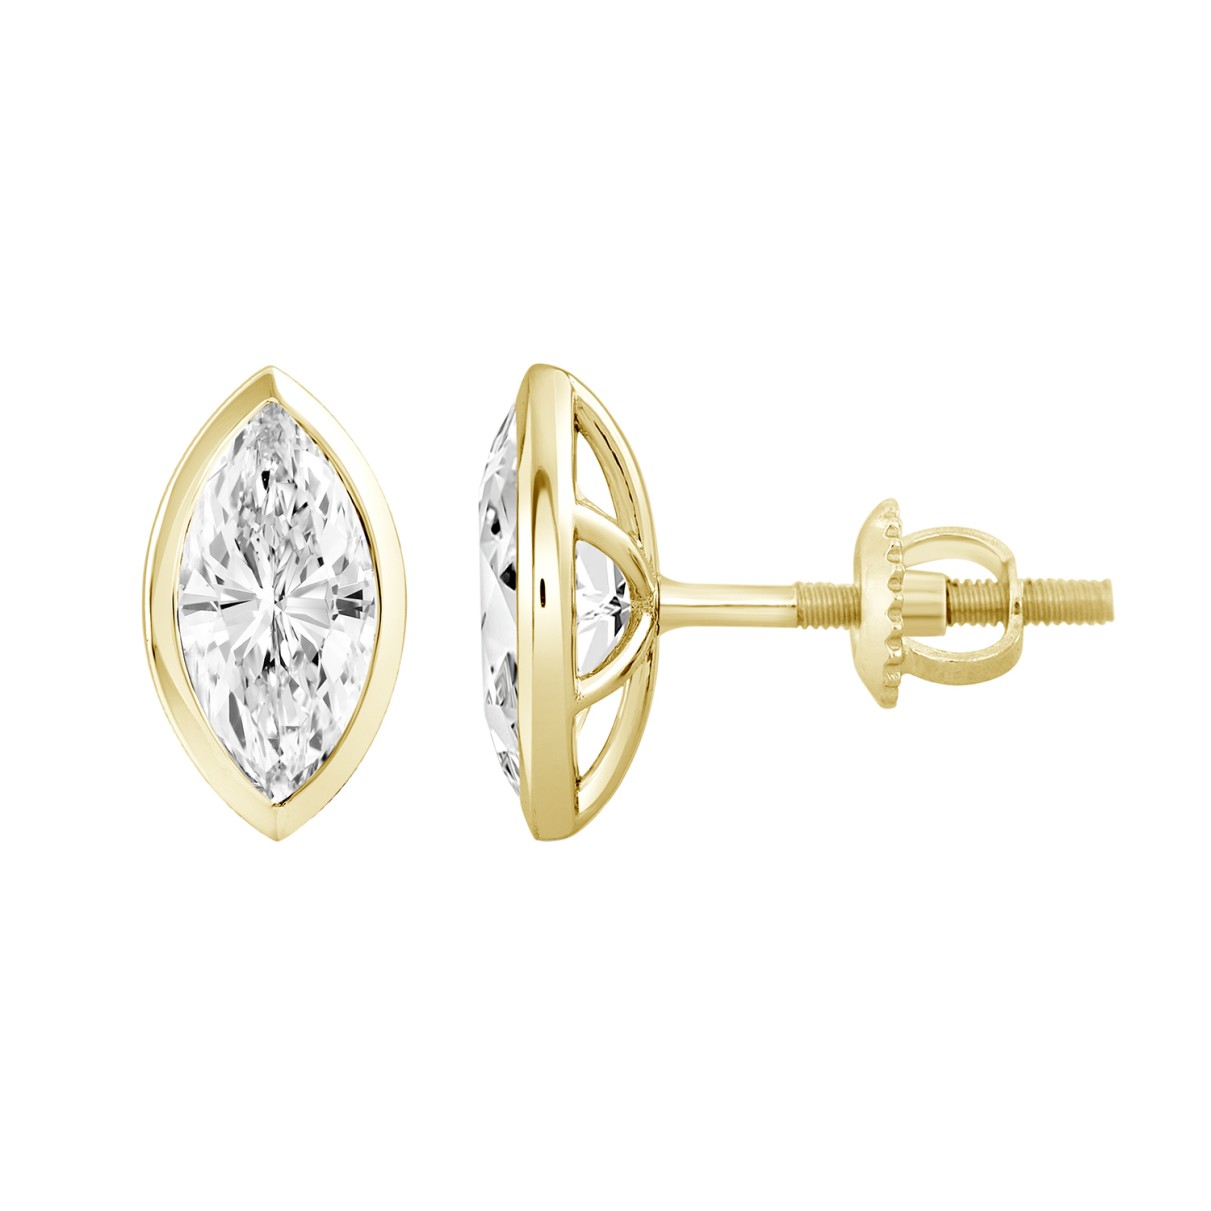 LADIES SOLITAIRE EARRINGS 3CT MARQUISE DIAMOND 14K YELLOW GOLD